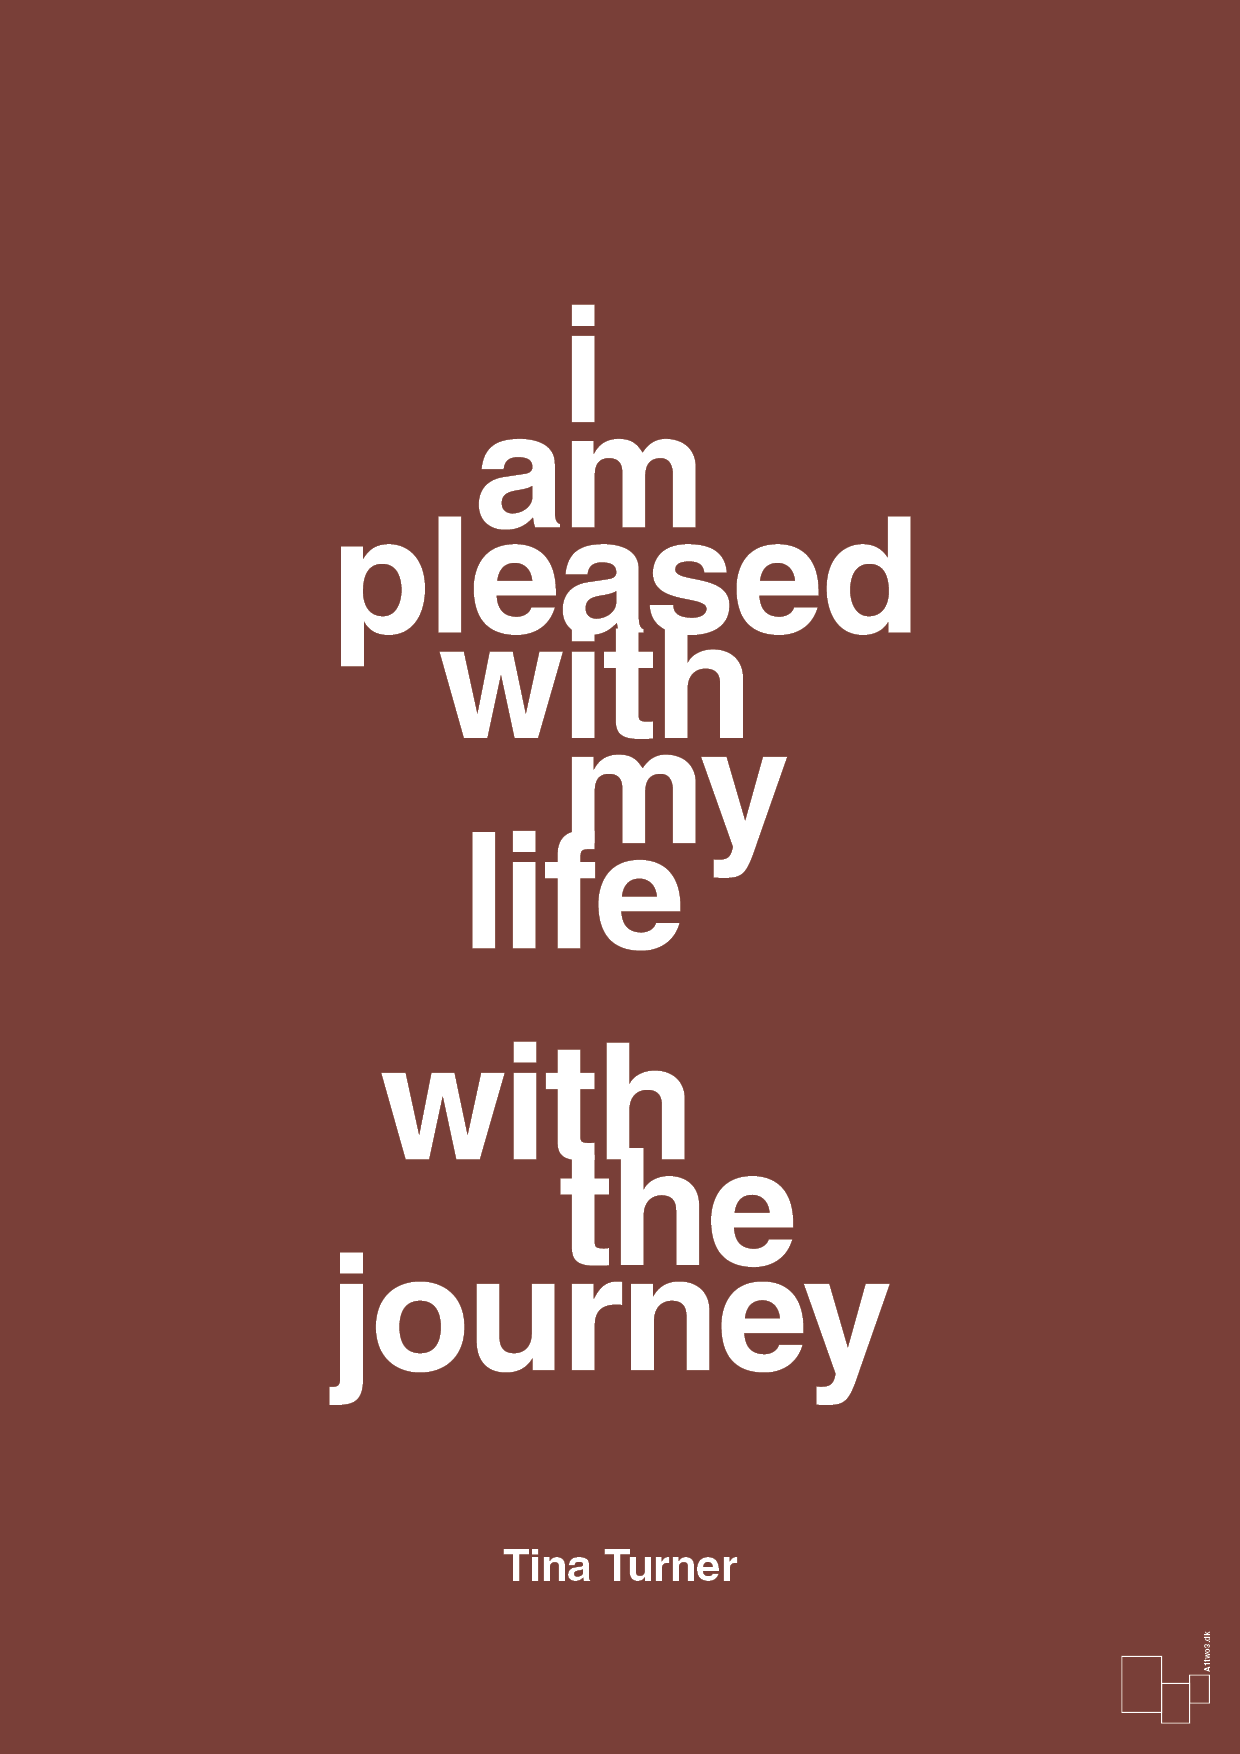 i am pleased with my life with the journey - Plakat med Citater i Red Pepper